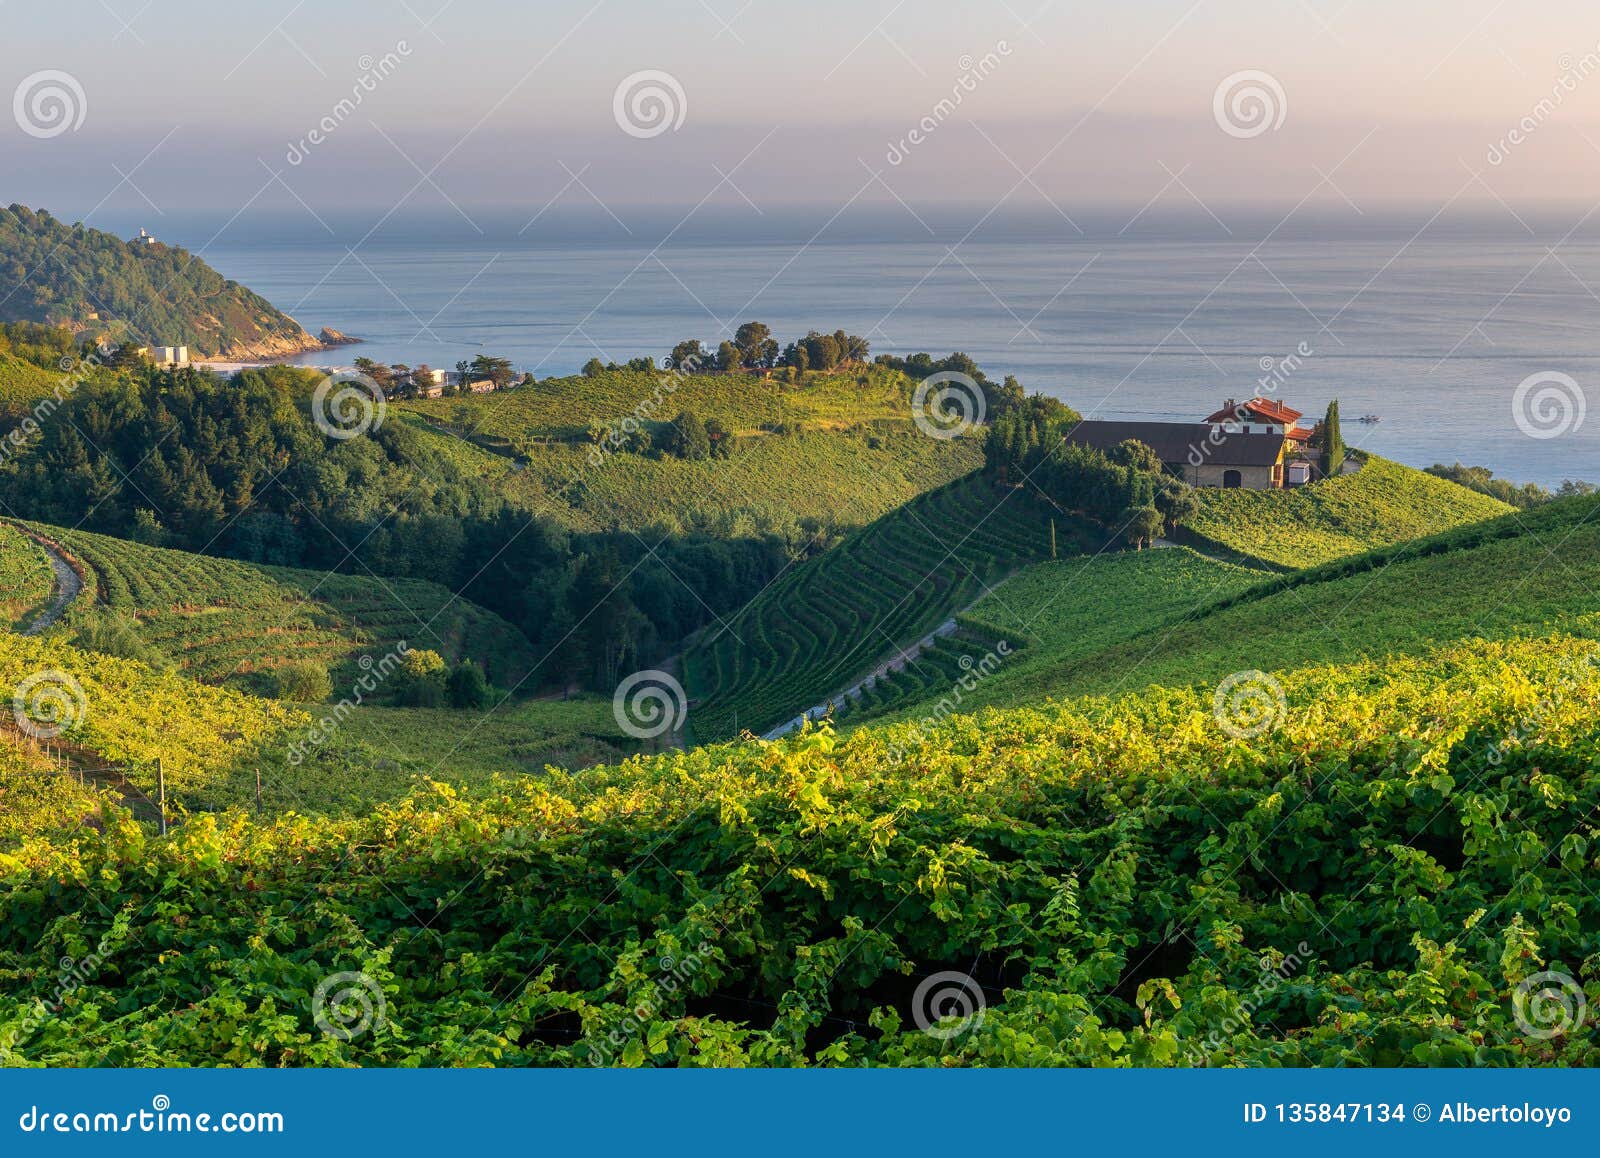 txakoli vineyards with cantabrian sea in the background, basque country, spain